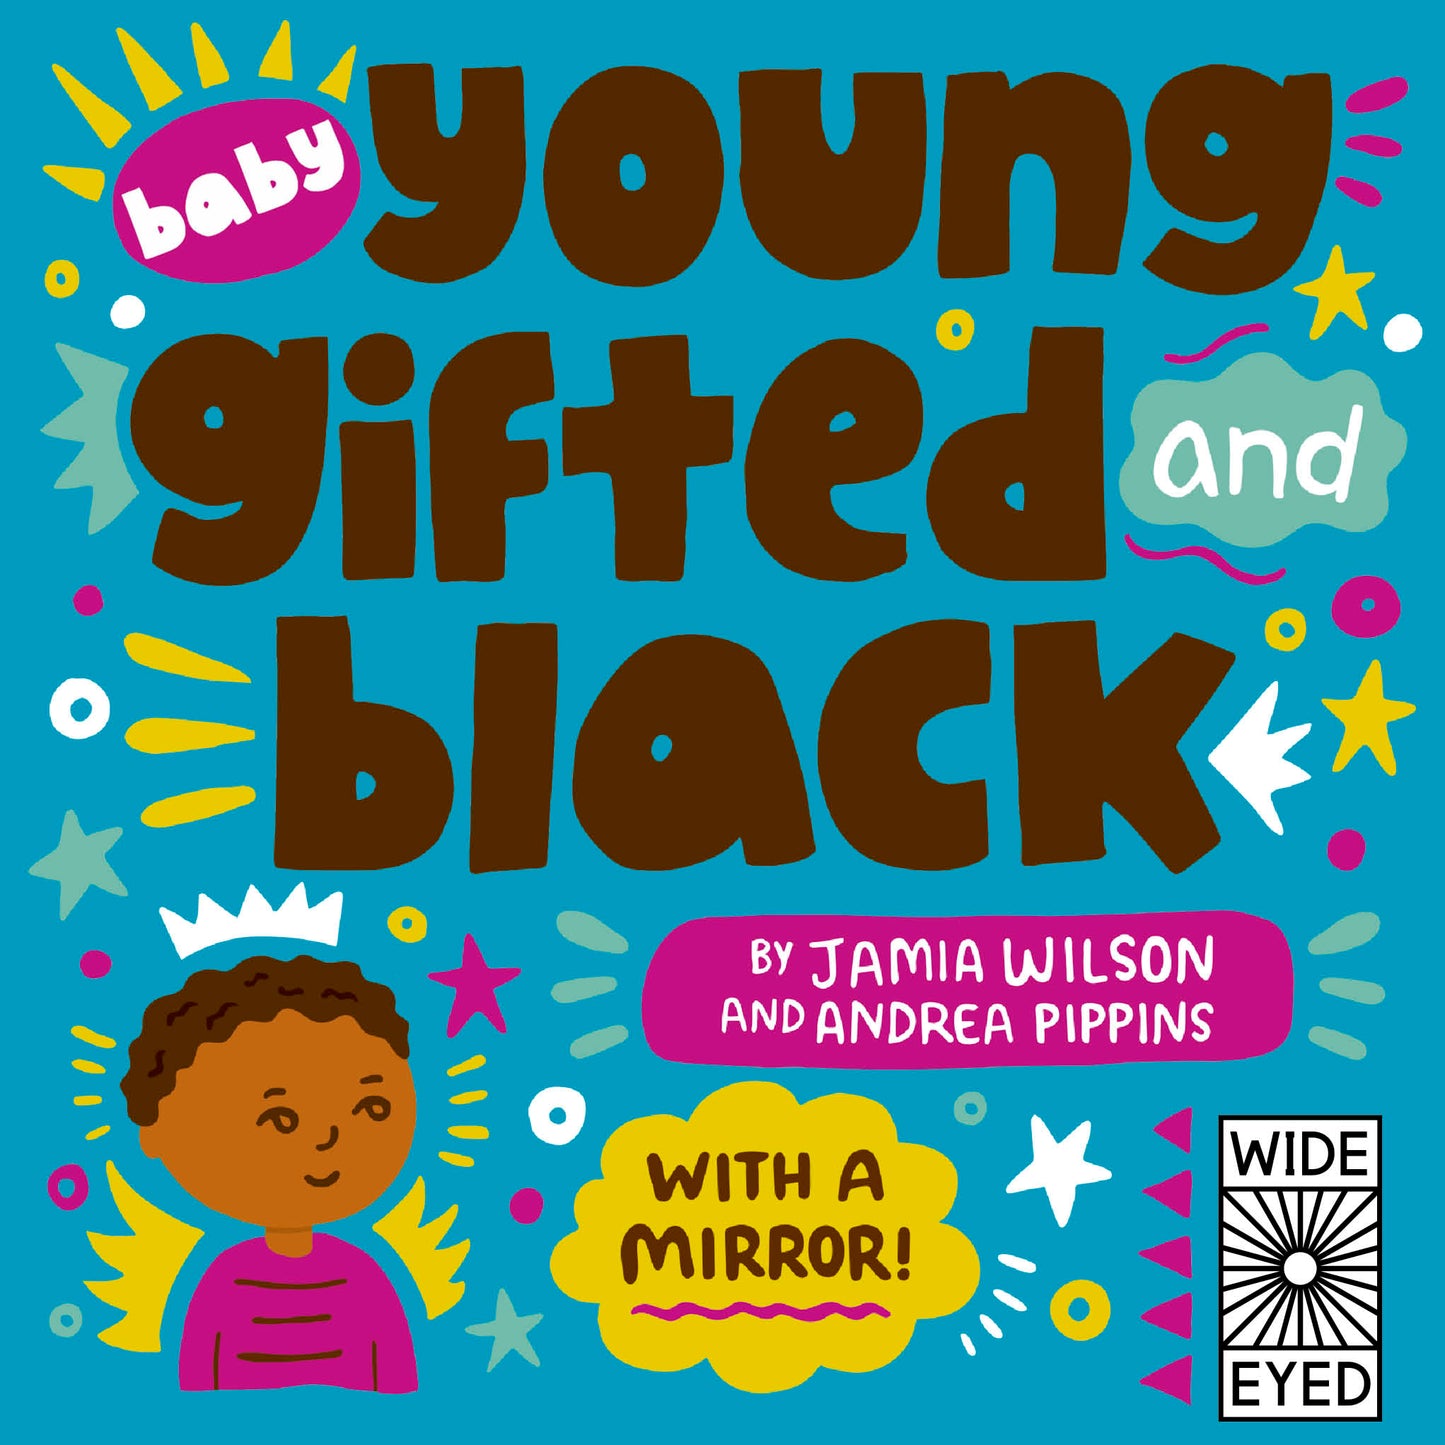 Baby Young, Gifted, and Black by Jamia Wilson (author) & Andrea Pippins (illustrator)